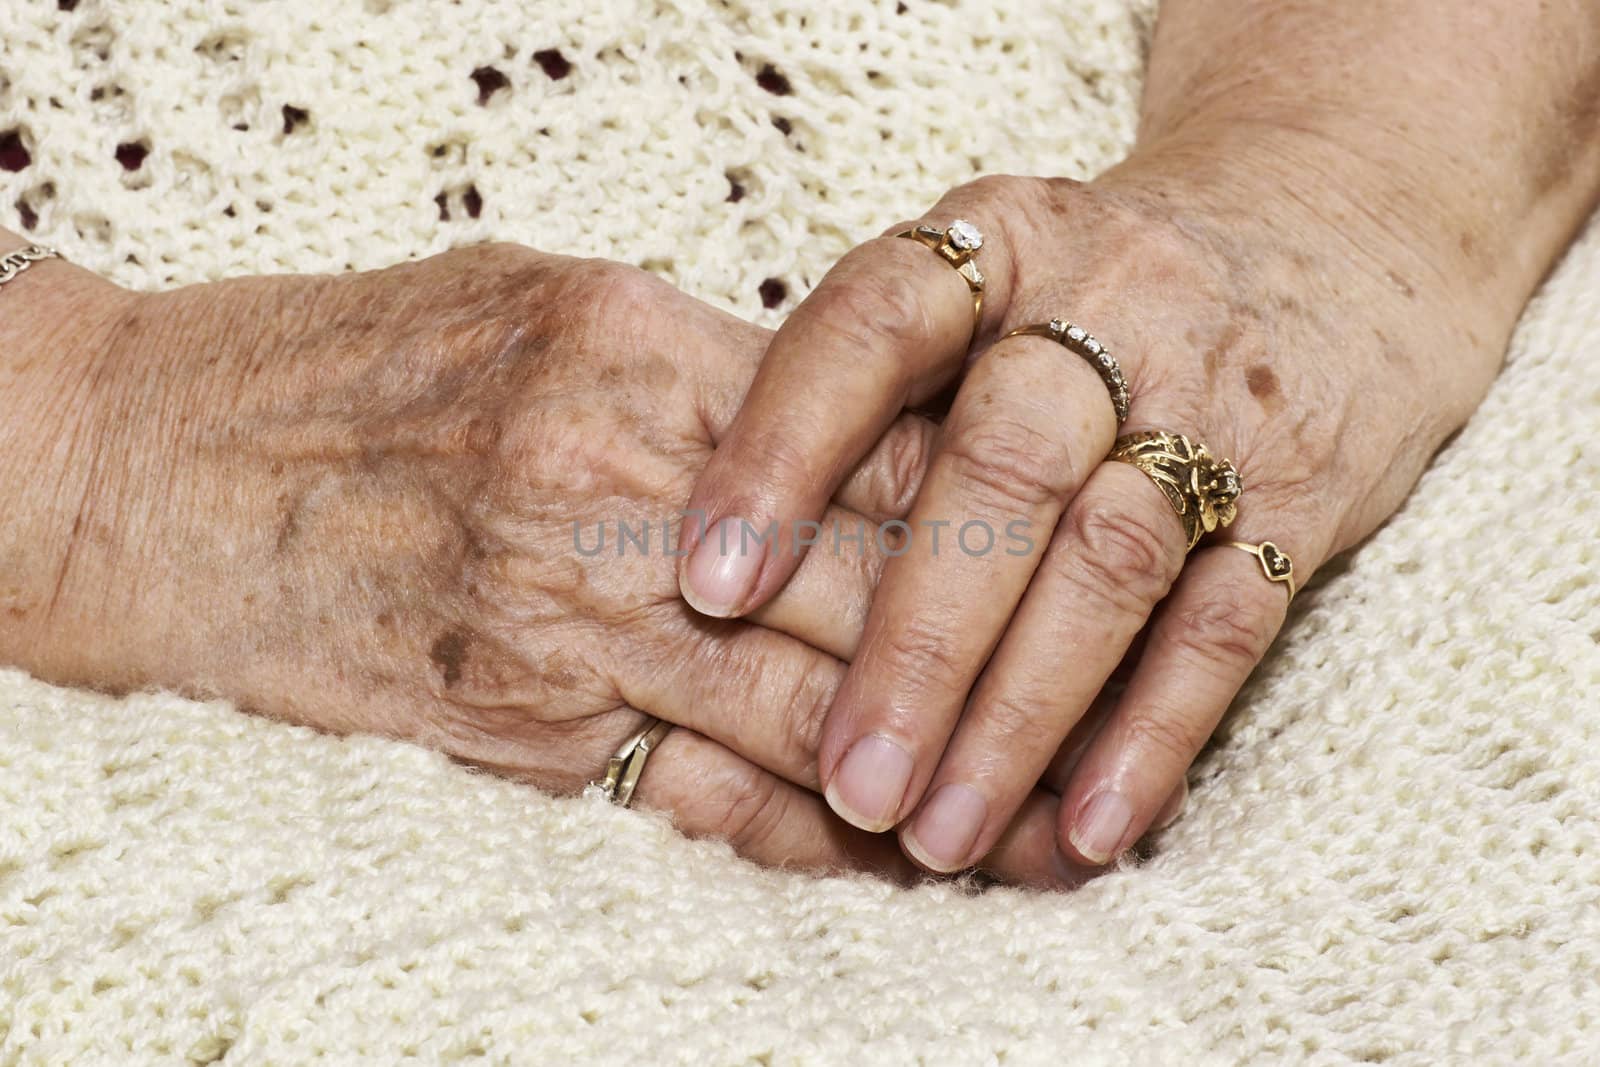 Senior woman's crossed hands with age spots over an off white knitted blanket, seems to be waiting.